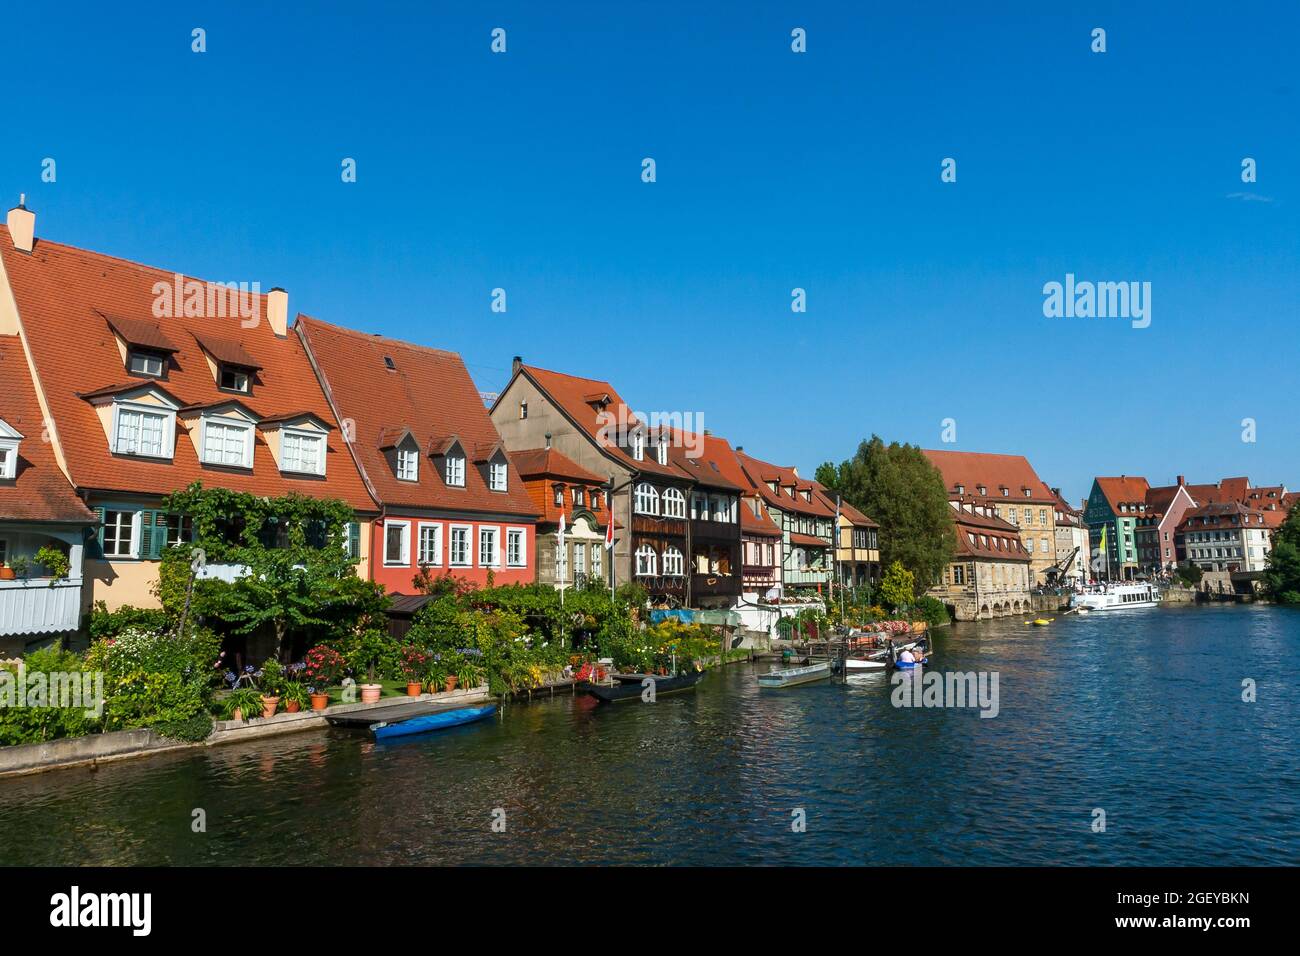 Picturesque view of the medieval buildings along the Regnitz River with old barge, moored boats and on the river shore, Bamberg Germany Stock Photo